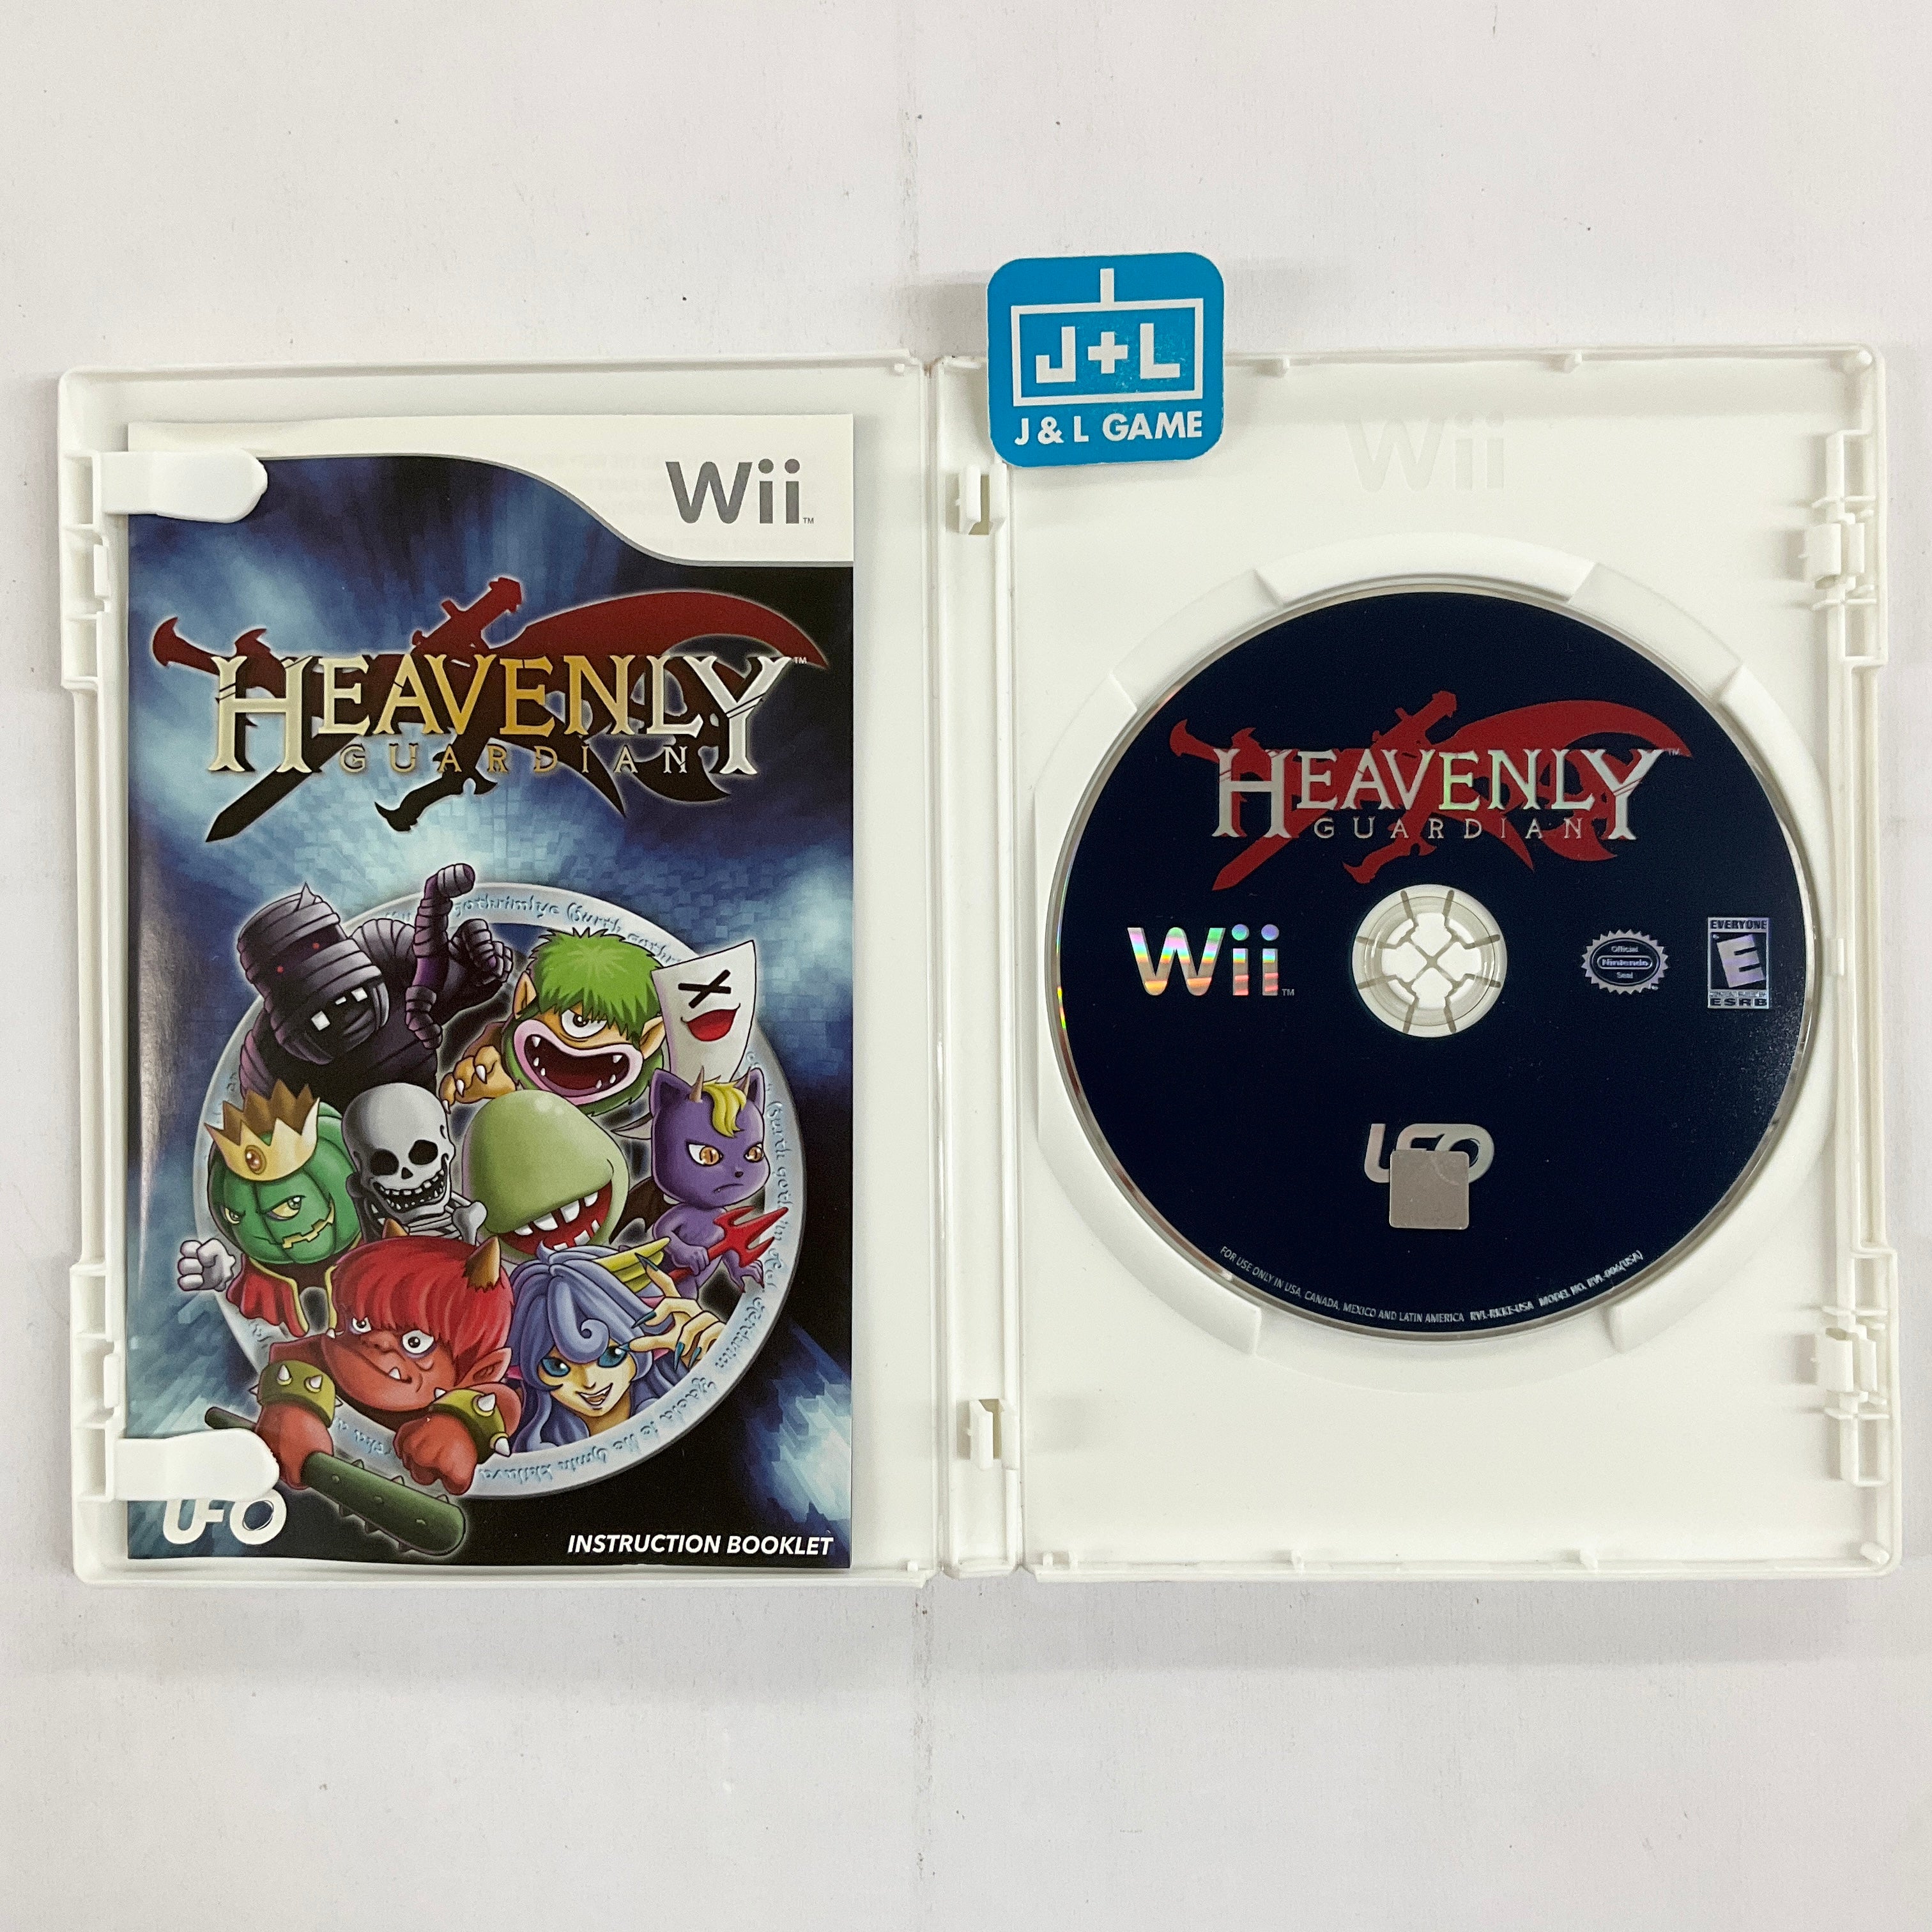 Heavenly Guardian - Nintendo Wii [Pre-Owned] Video Games Tommo   